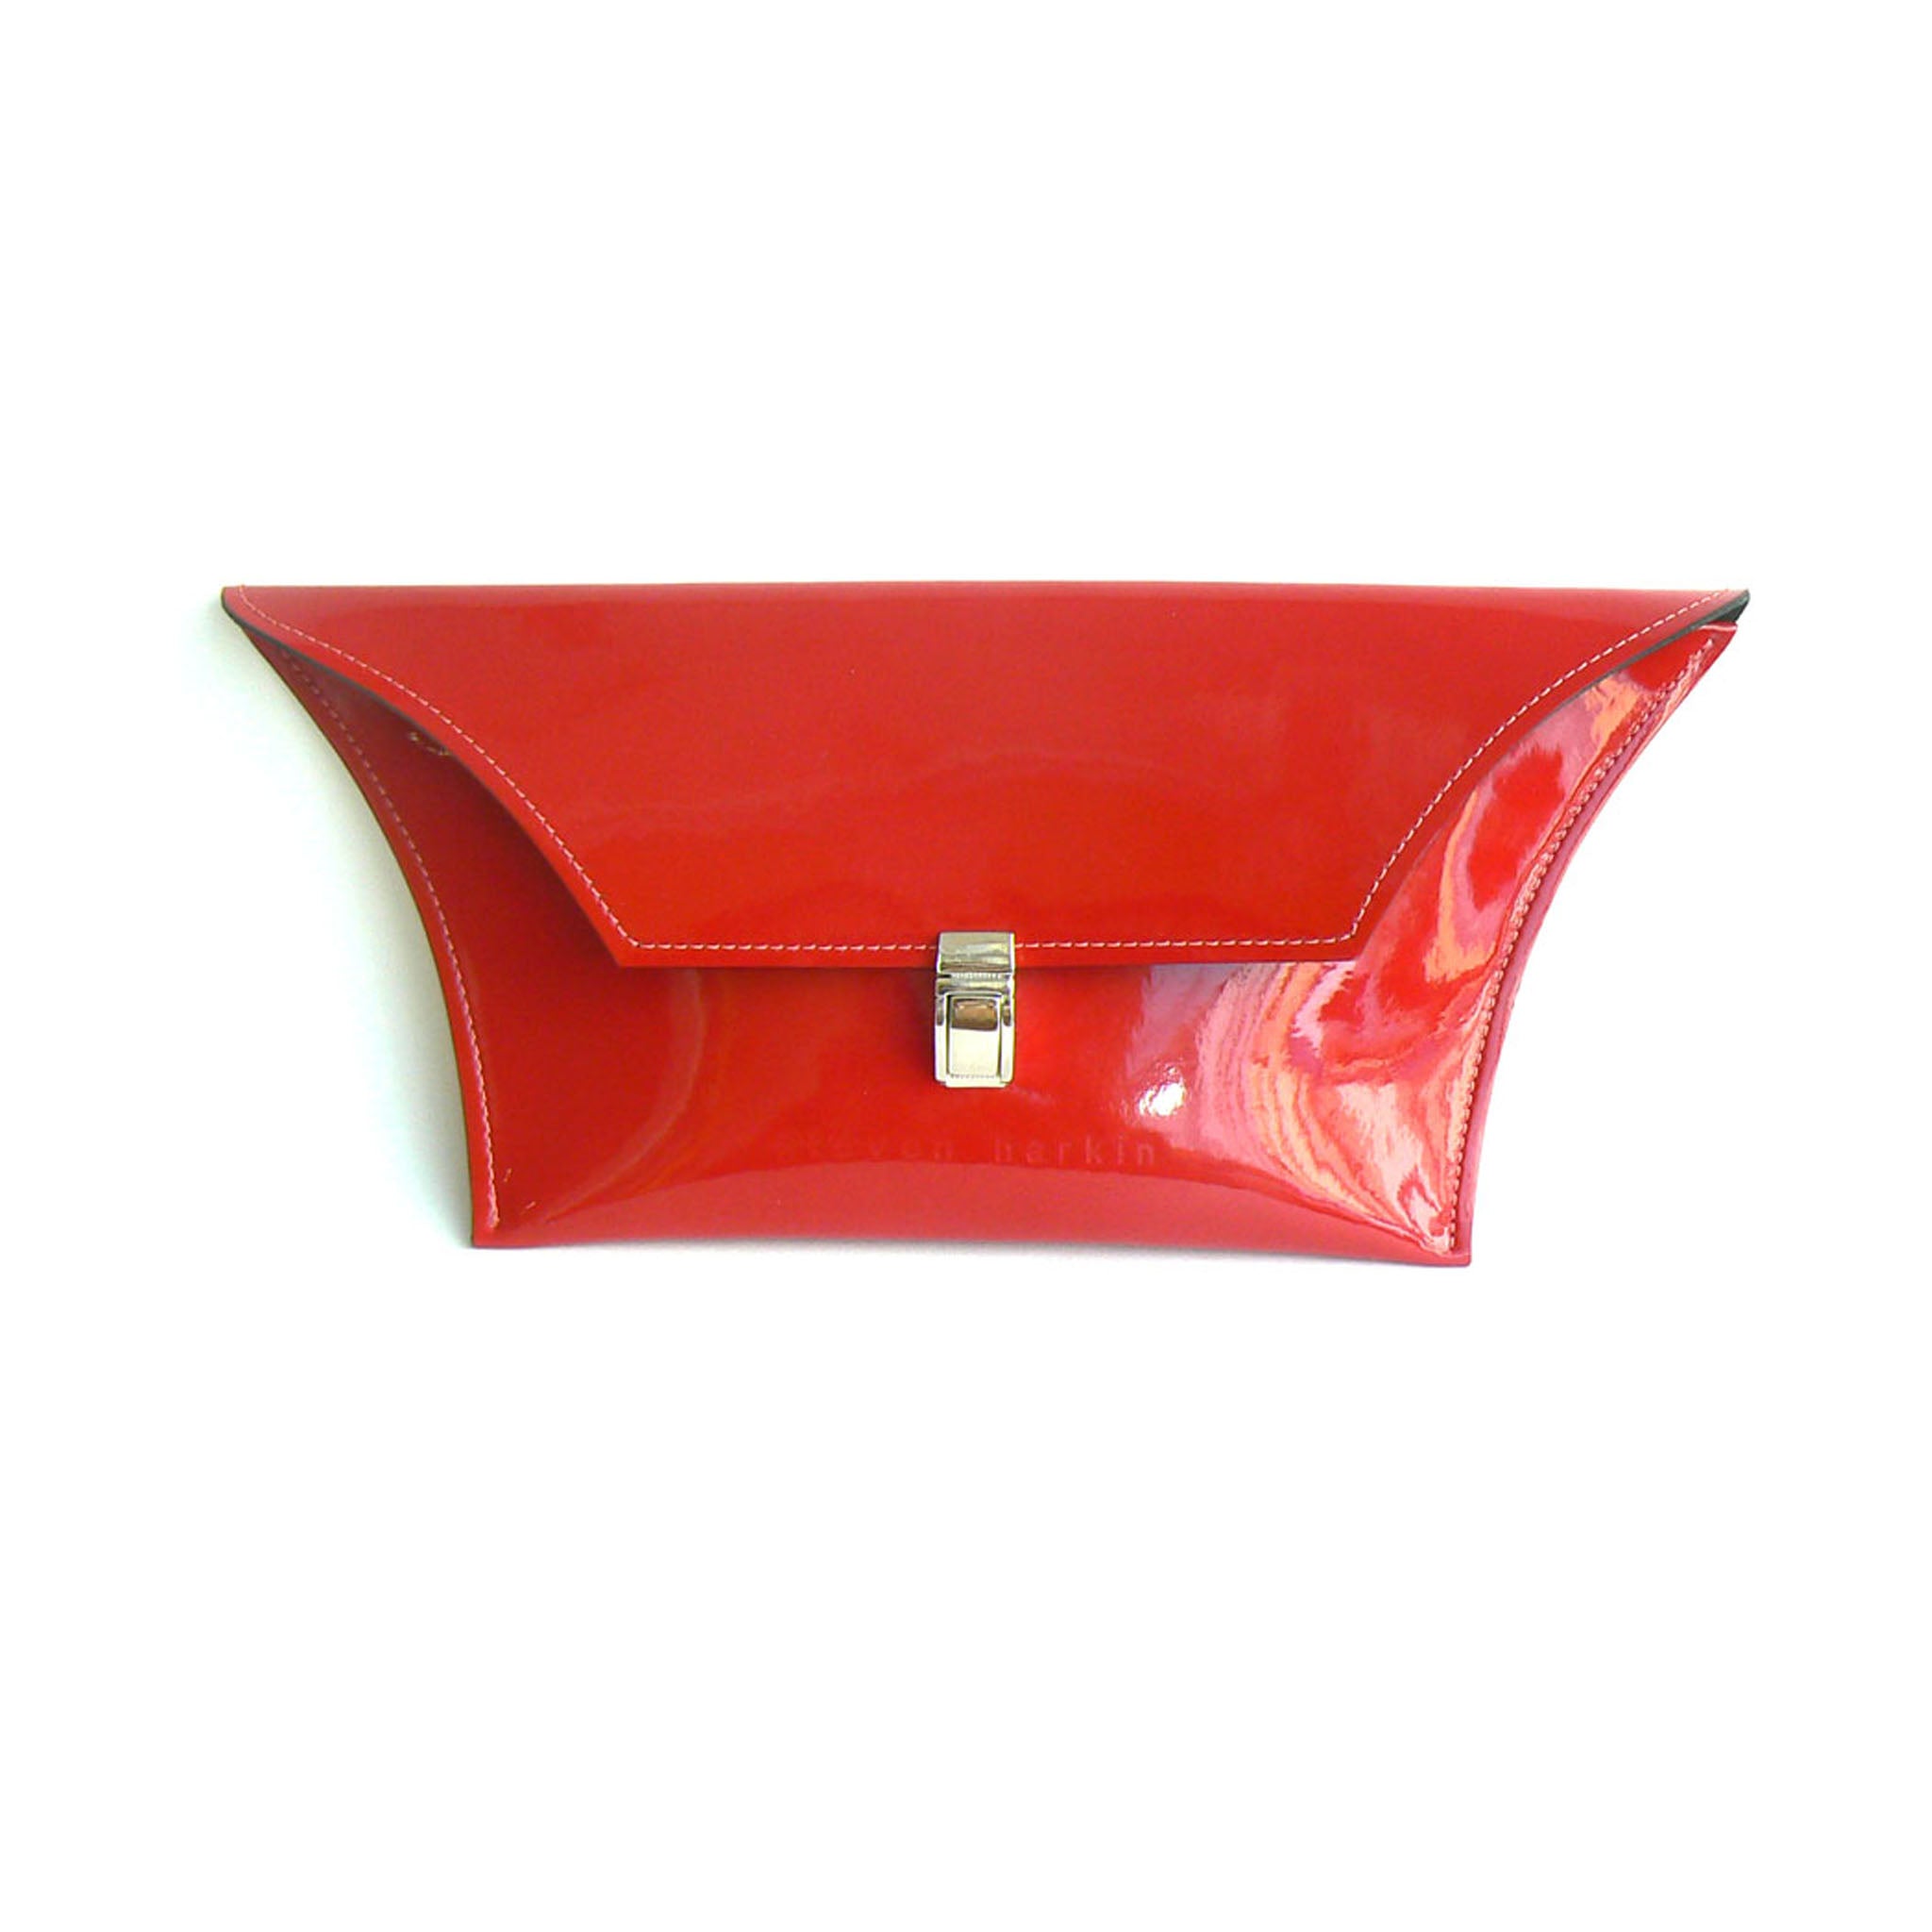 Red Patent Clutch Bag – steven harkin leather bags